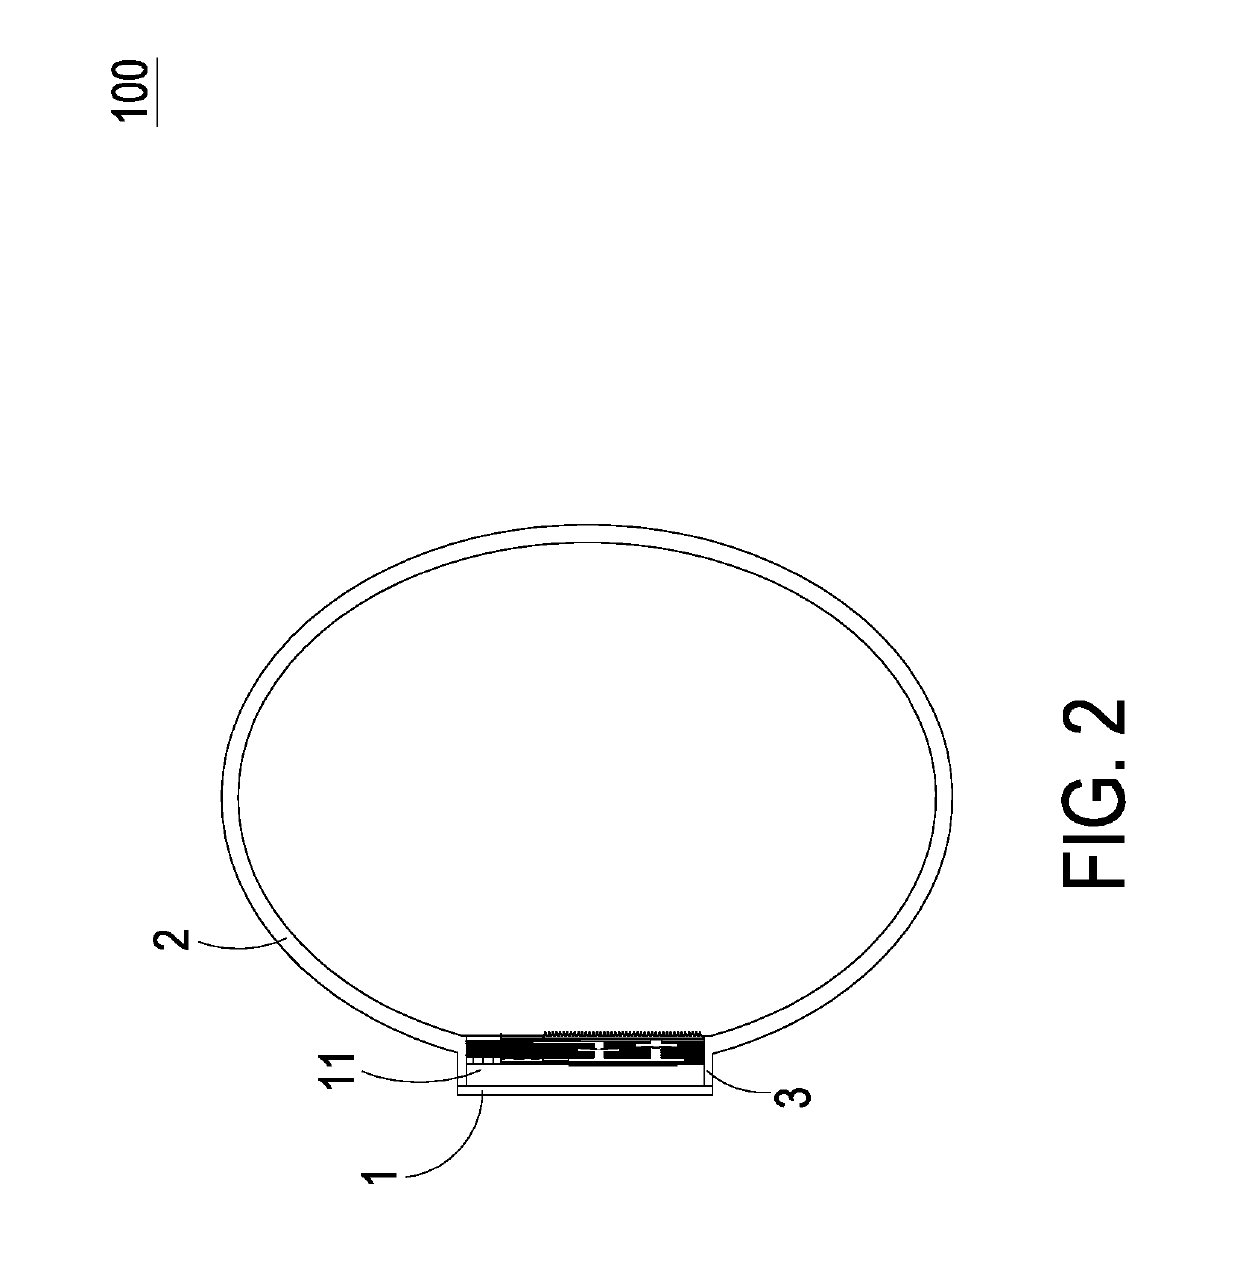 Wearable liquid supplying device for human insulin injection